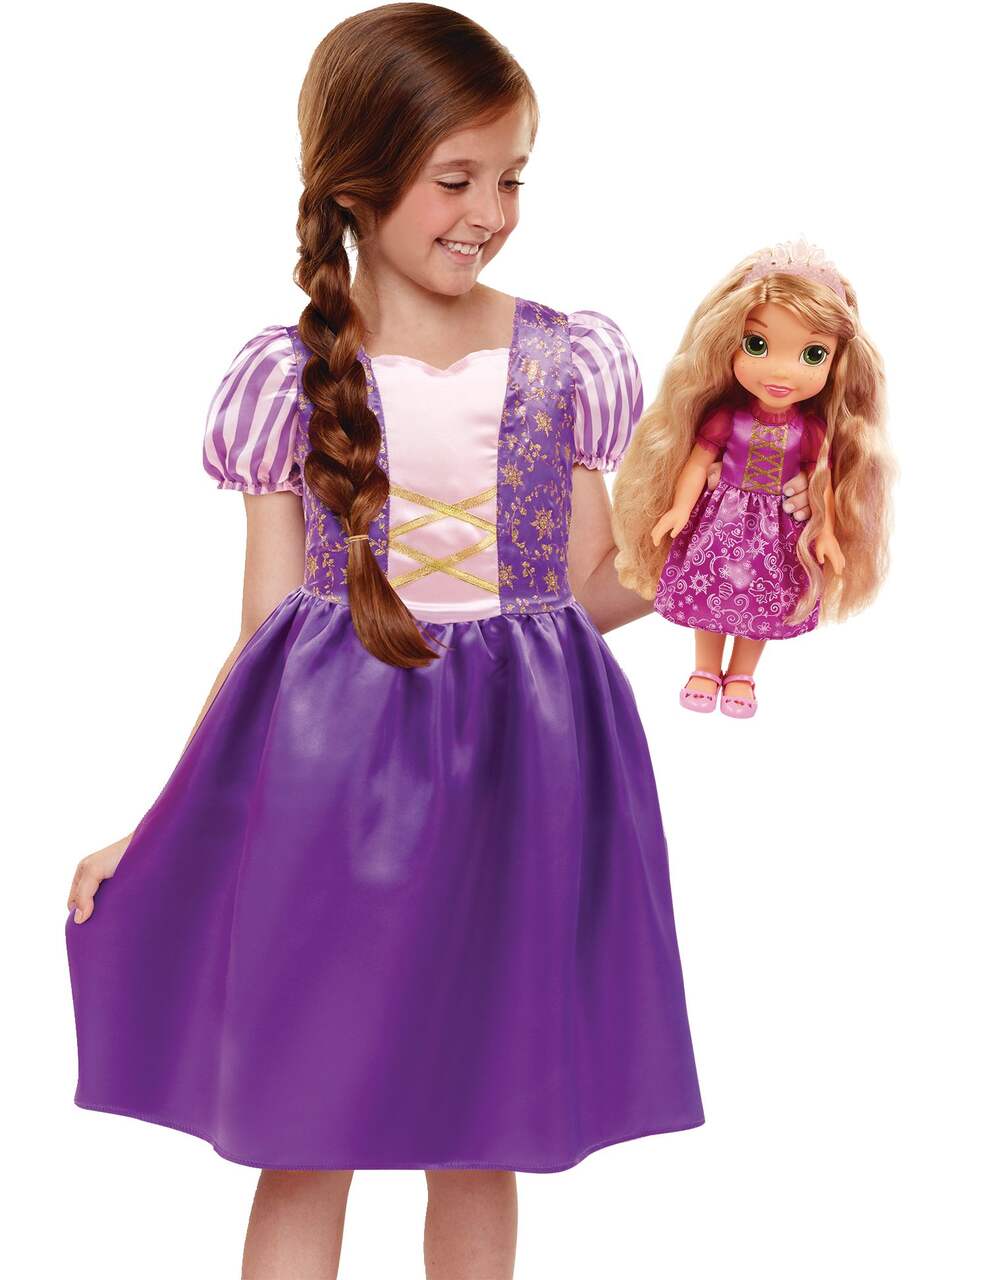 ONEST 30 Pieces Princess Doll Clothes and Accessories for 11.5 Inch Girl  Doll Include 10 Pieces Princess Dresses, 10 Pairs Shoes and 10 Pieces